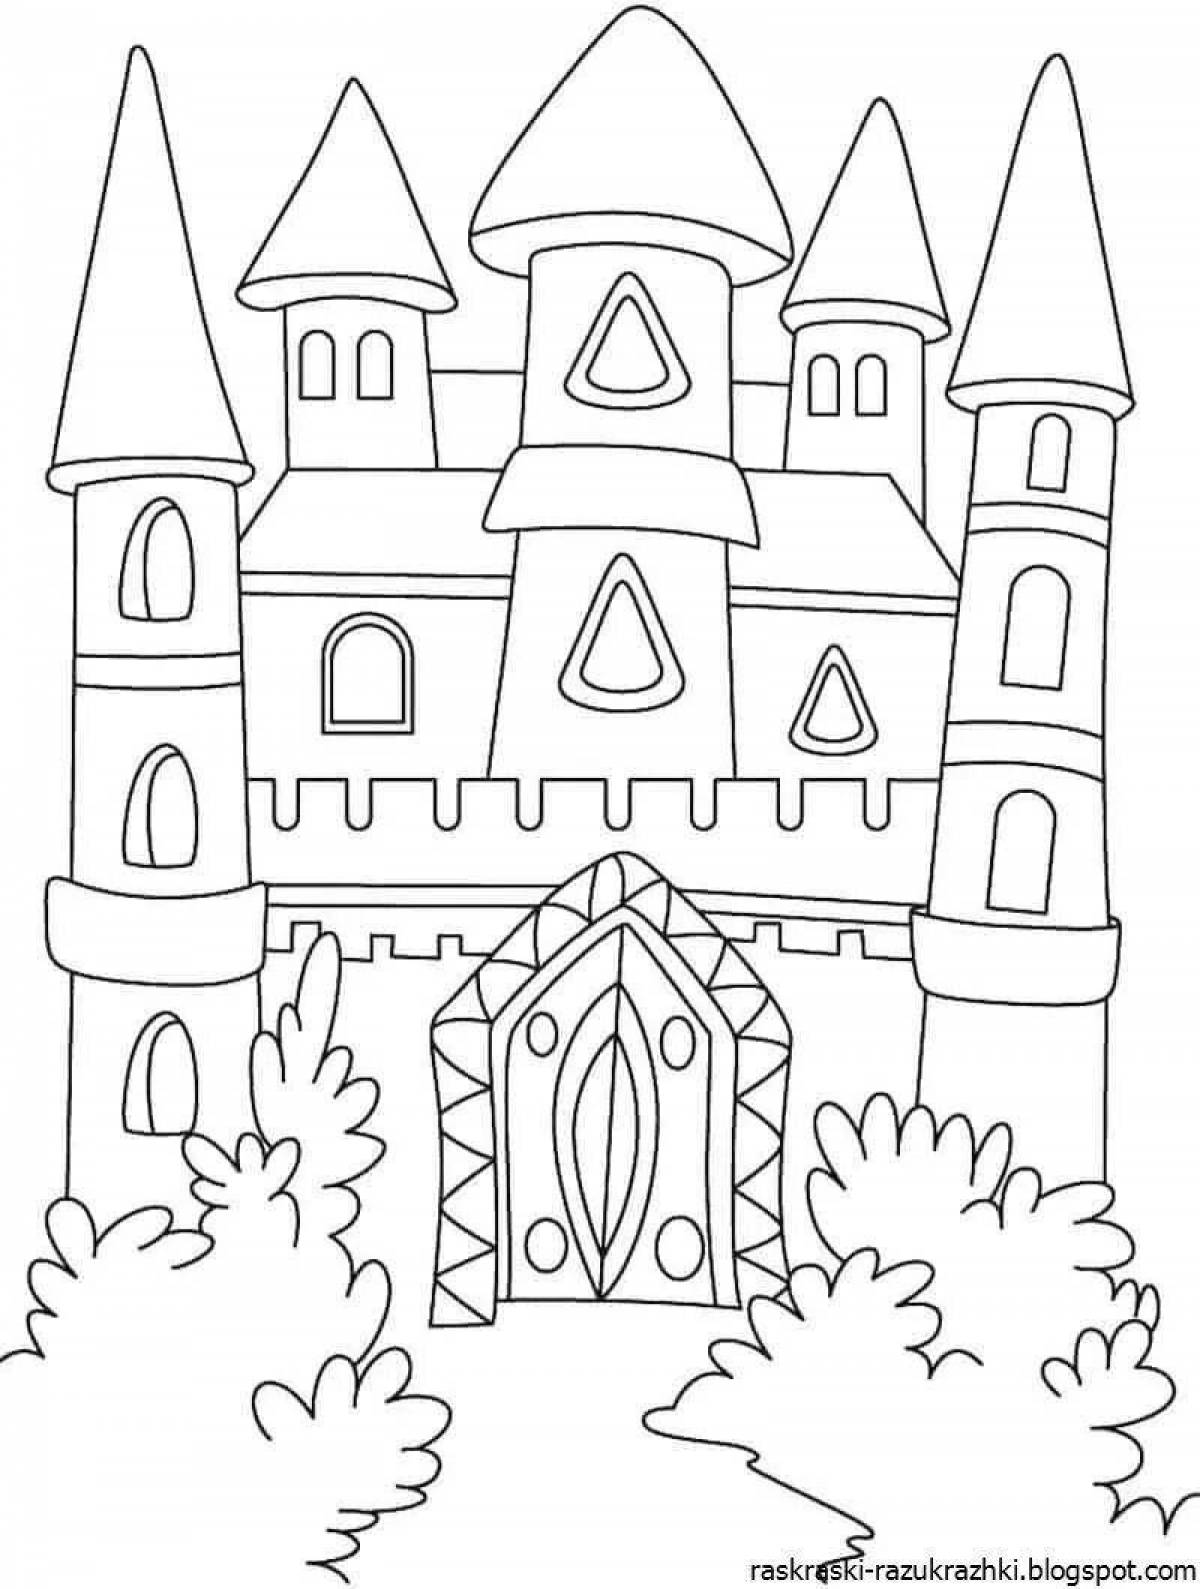 Major coloring pages for girls with houses and castles